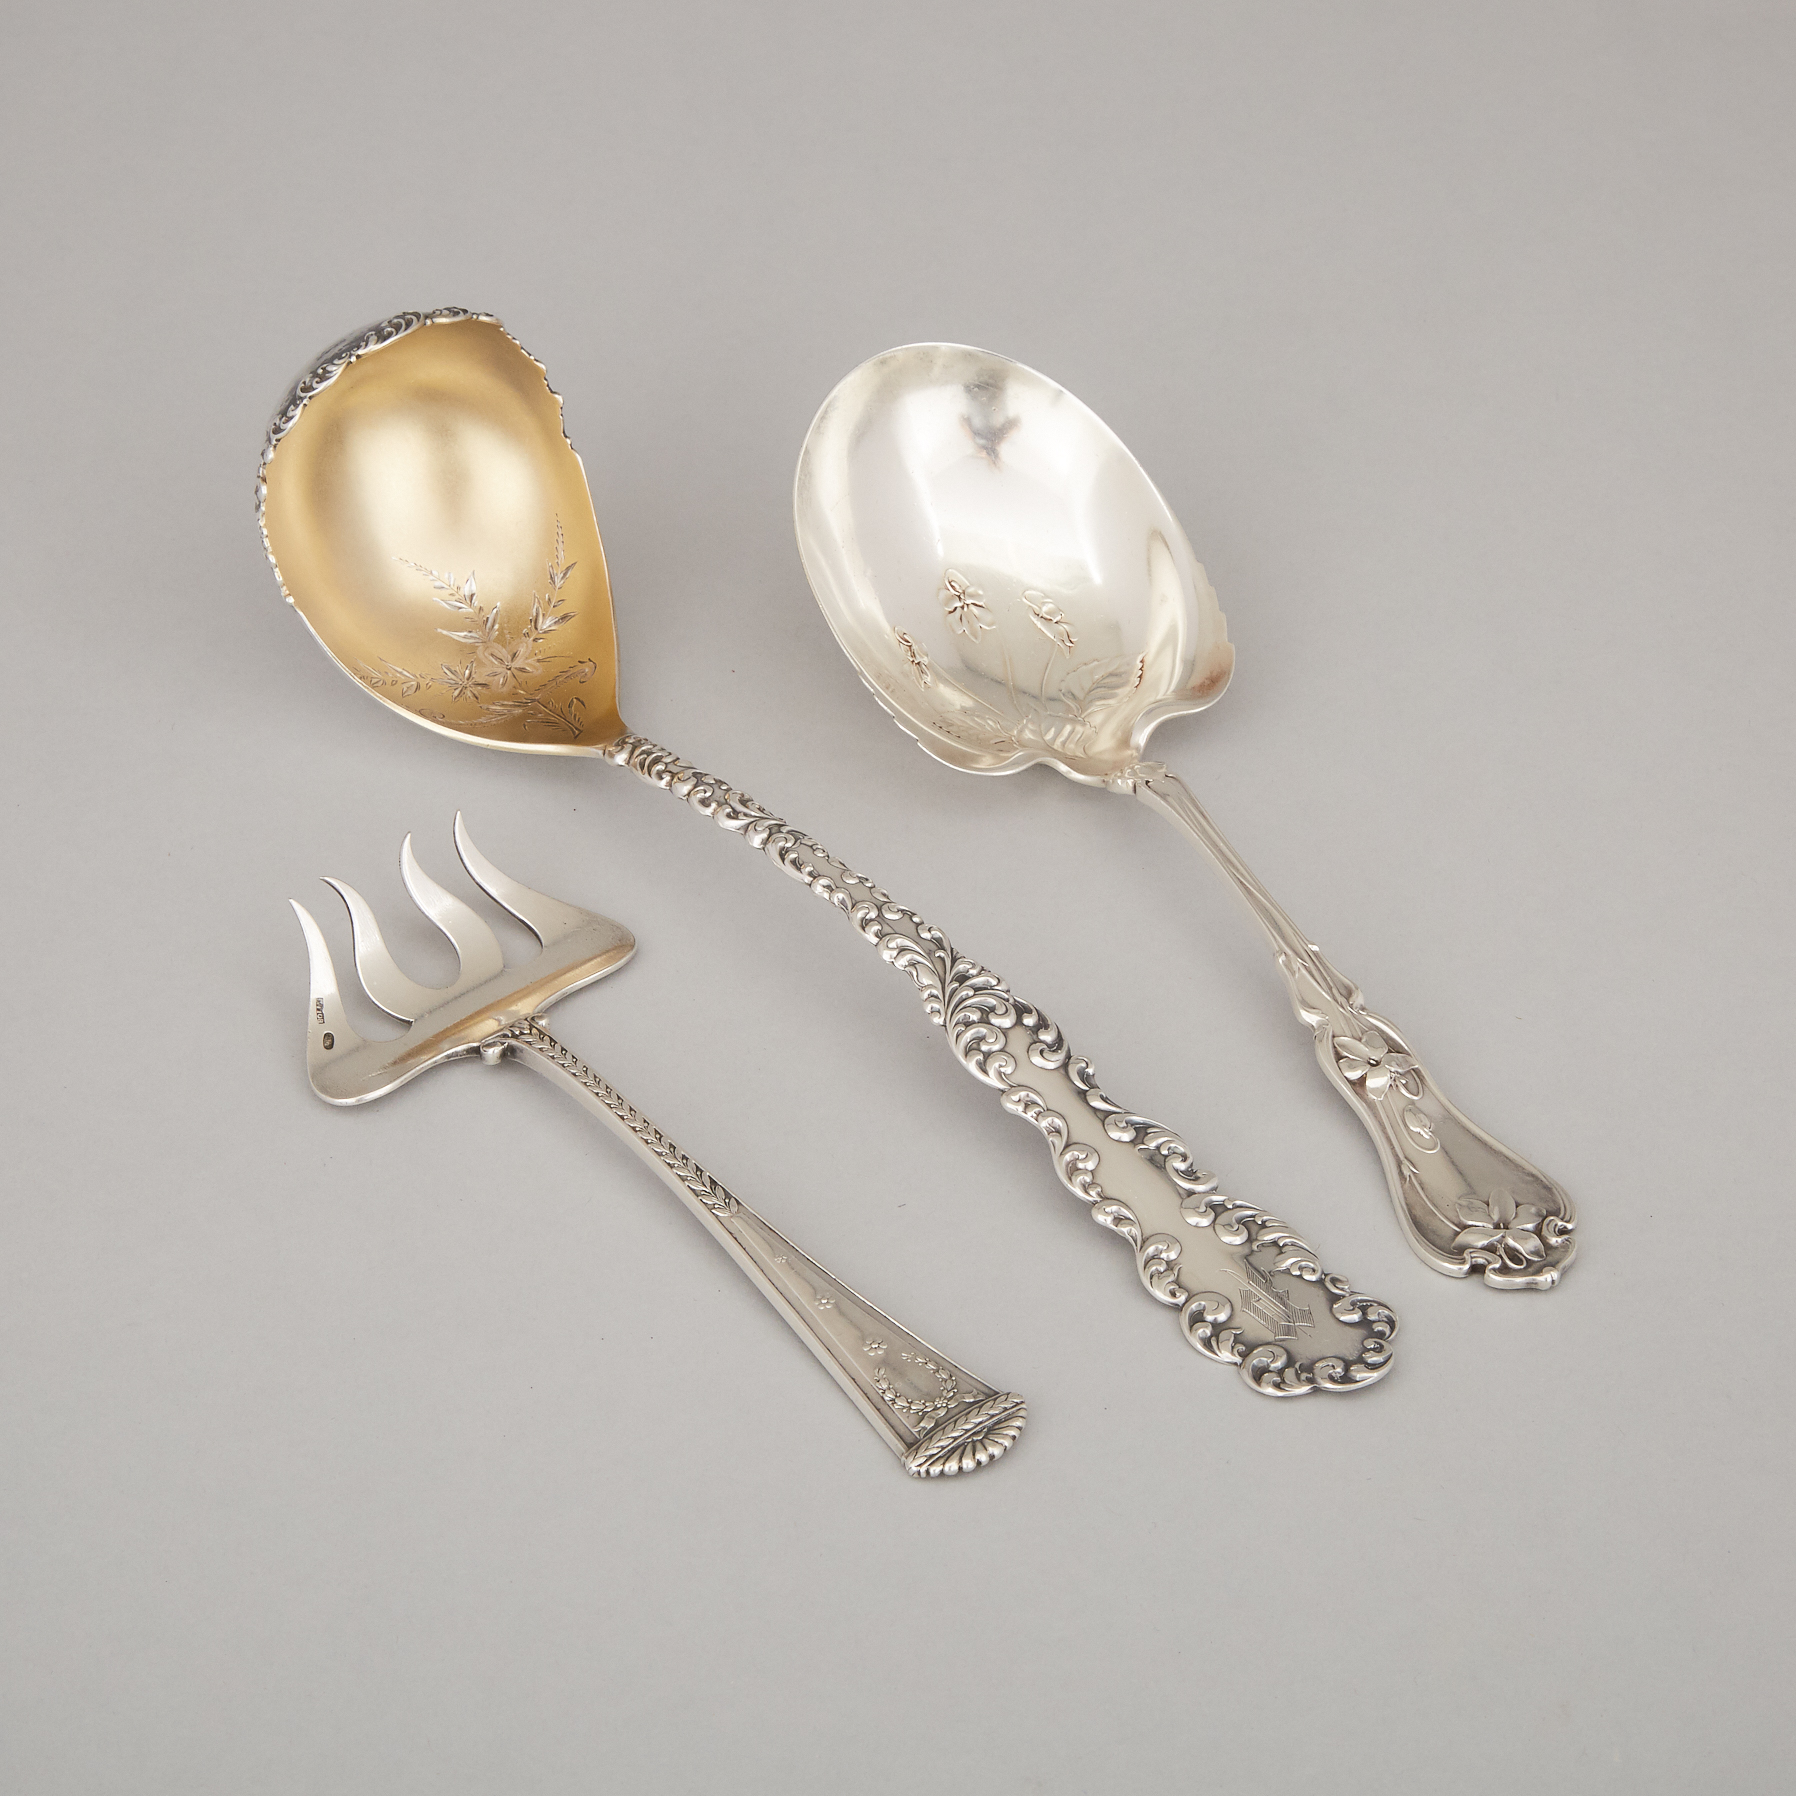 American Silver Punch Ladle, R. Wallace & Sons, Wallingford, Ct., Berry Spoon, Whiting Mfg. Co., New York, N.Y., and a Russian Sardine Fork, Bolin, Moscow, c.1900